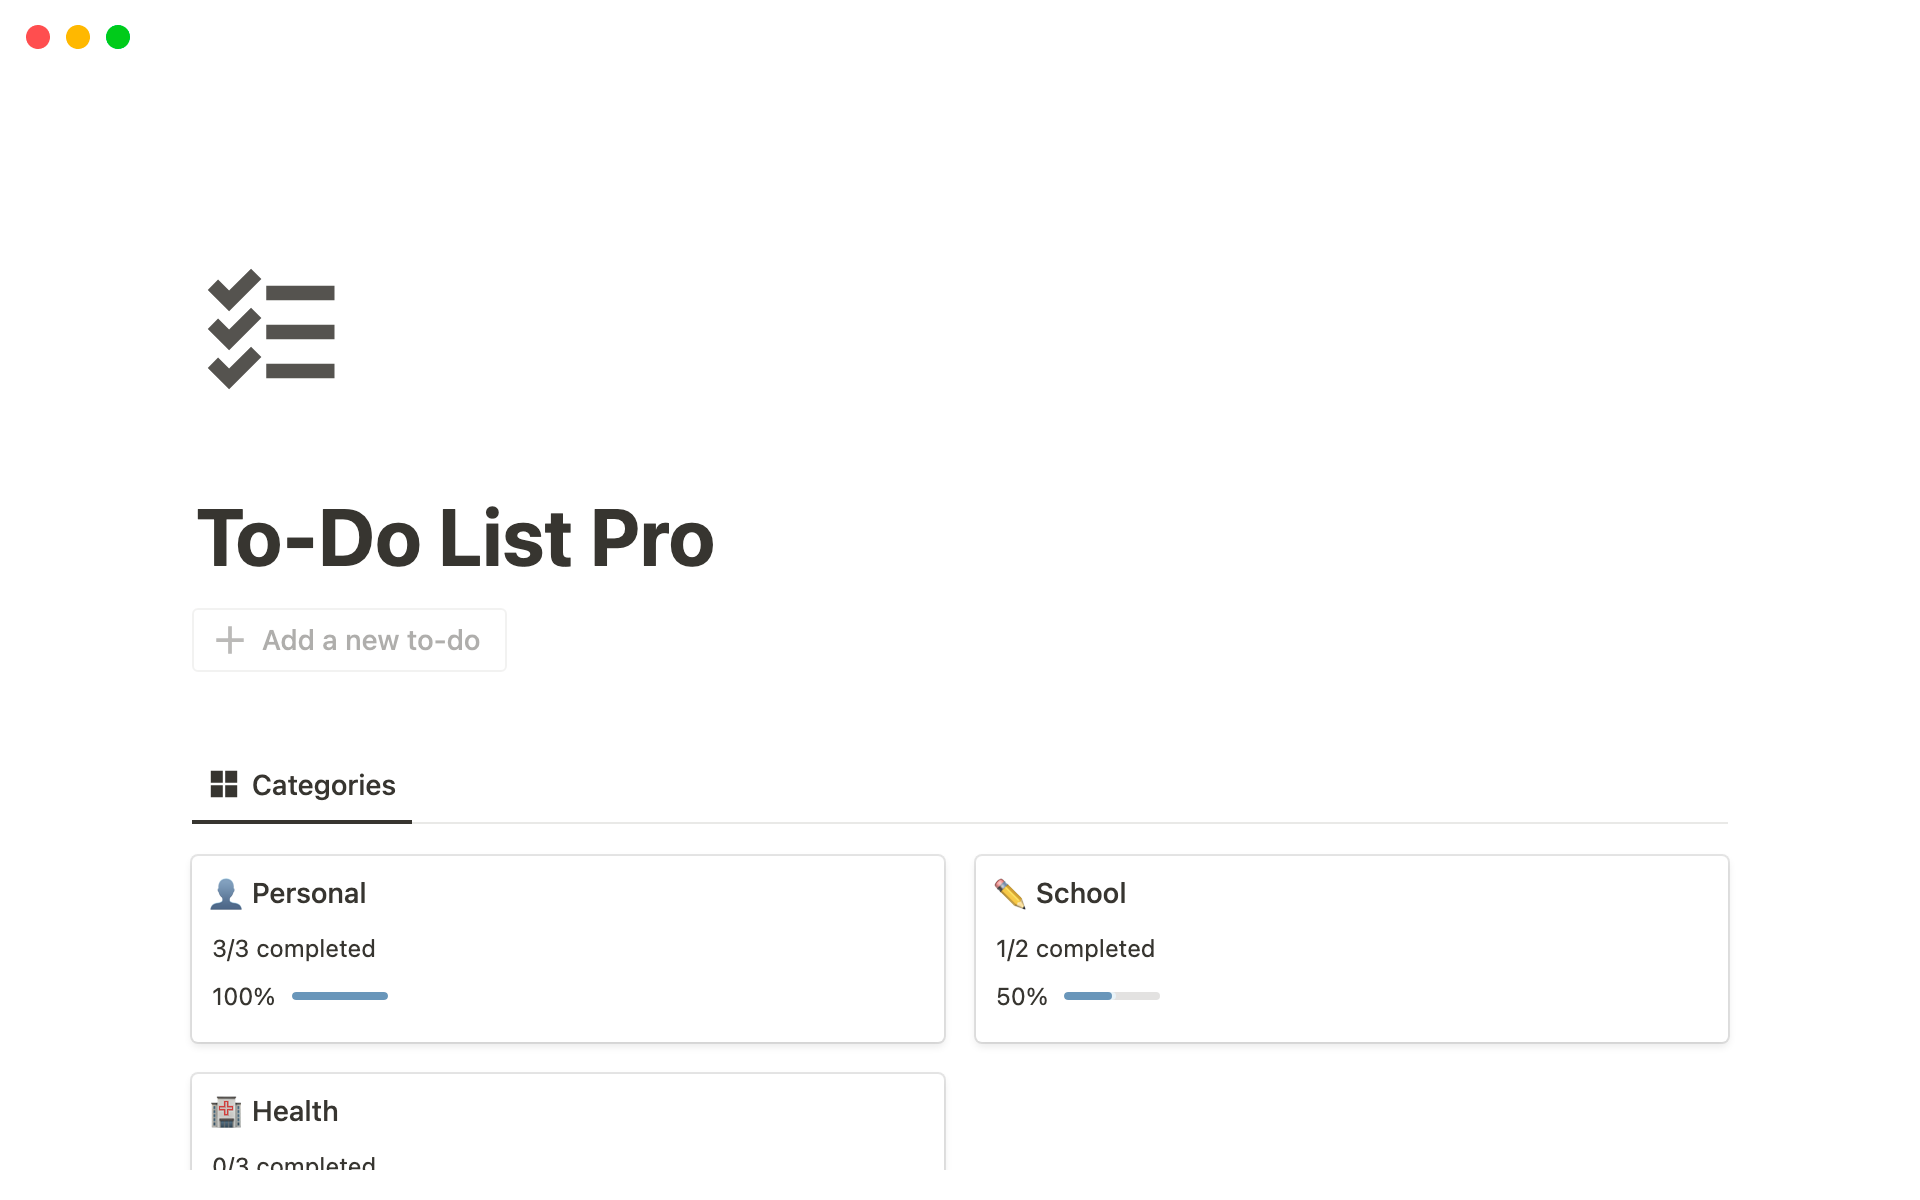 Maximize your daily productivity and easily manage your to-do list with this comprehensive template, featuring categorization feature, real-time progress tracking, and completion indicator to help you stay organized and achieve optimal productivity.